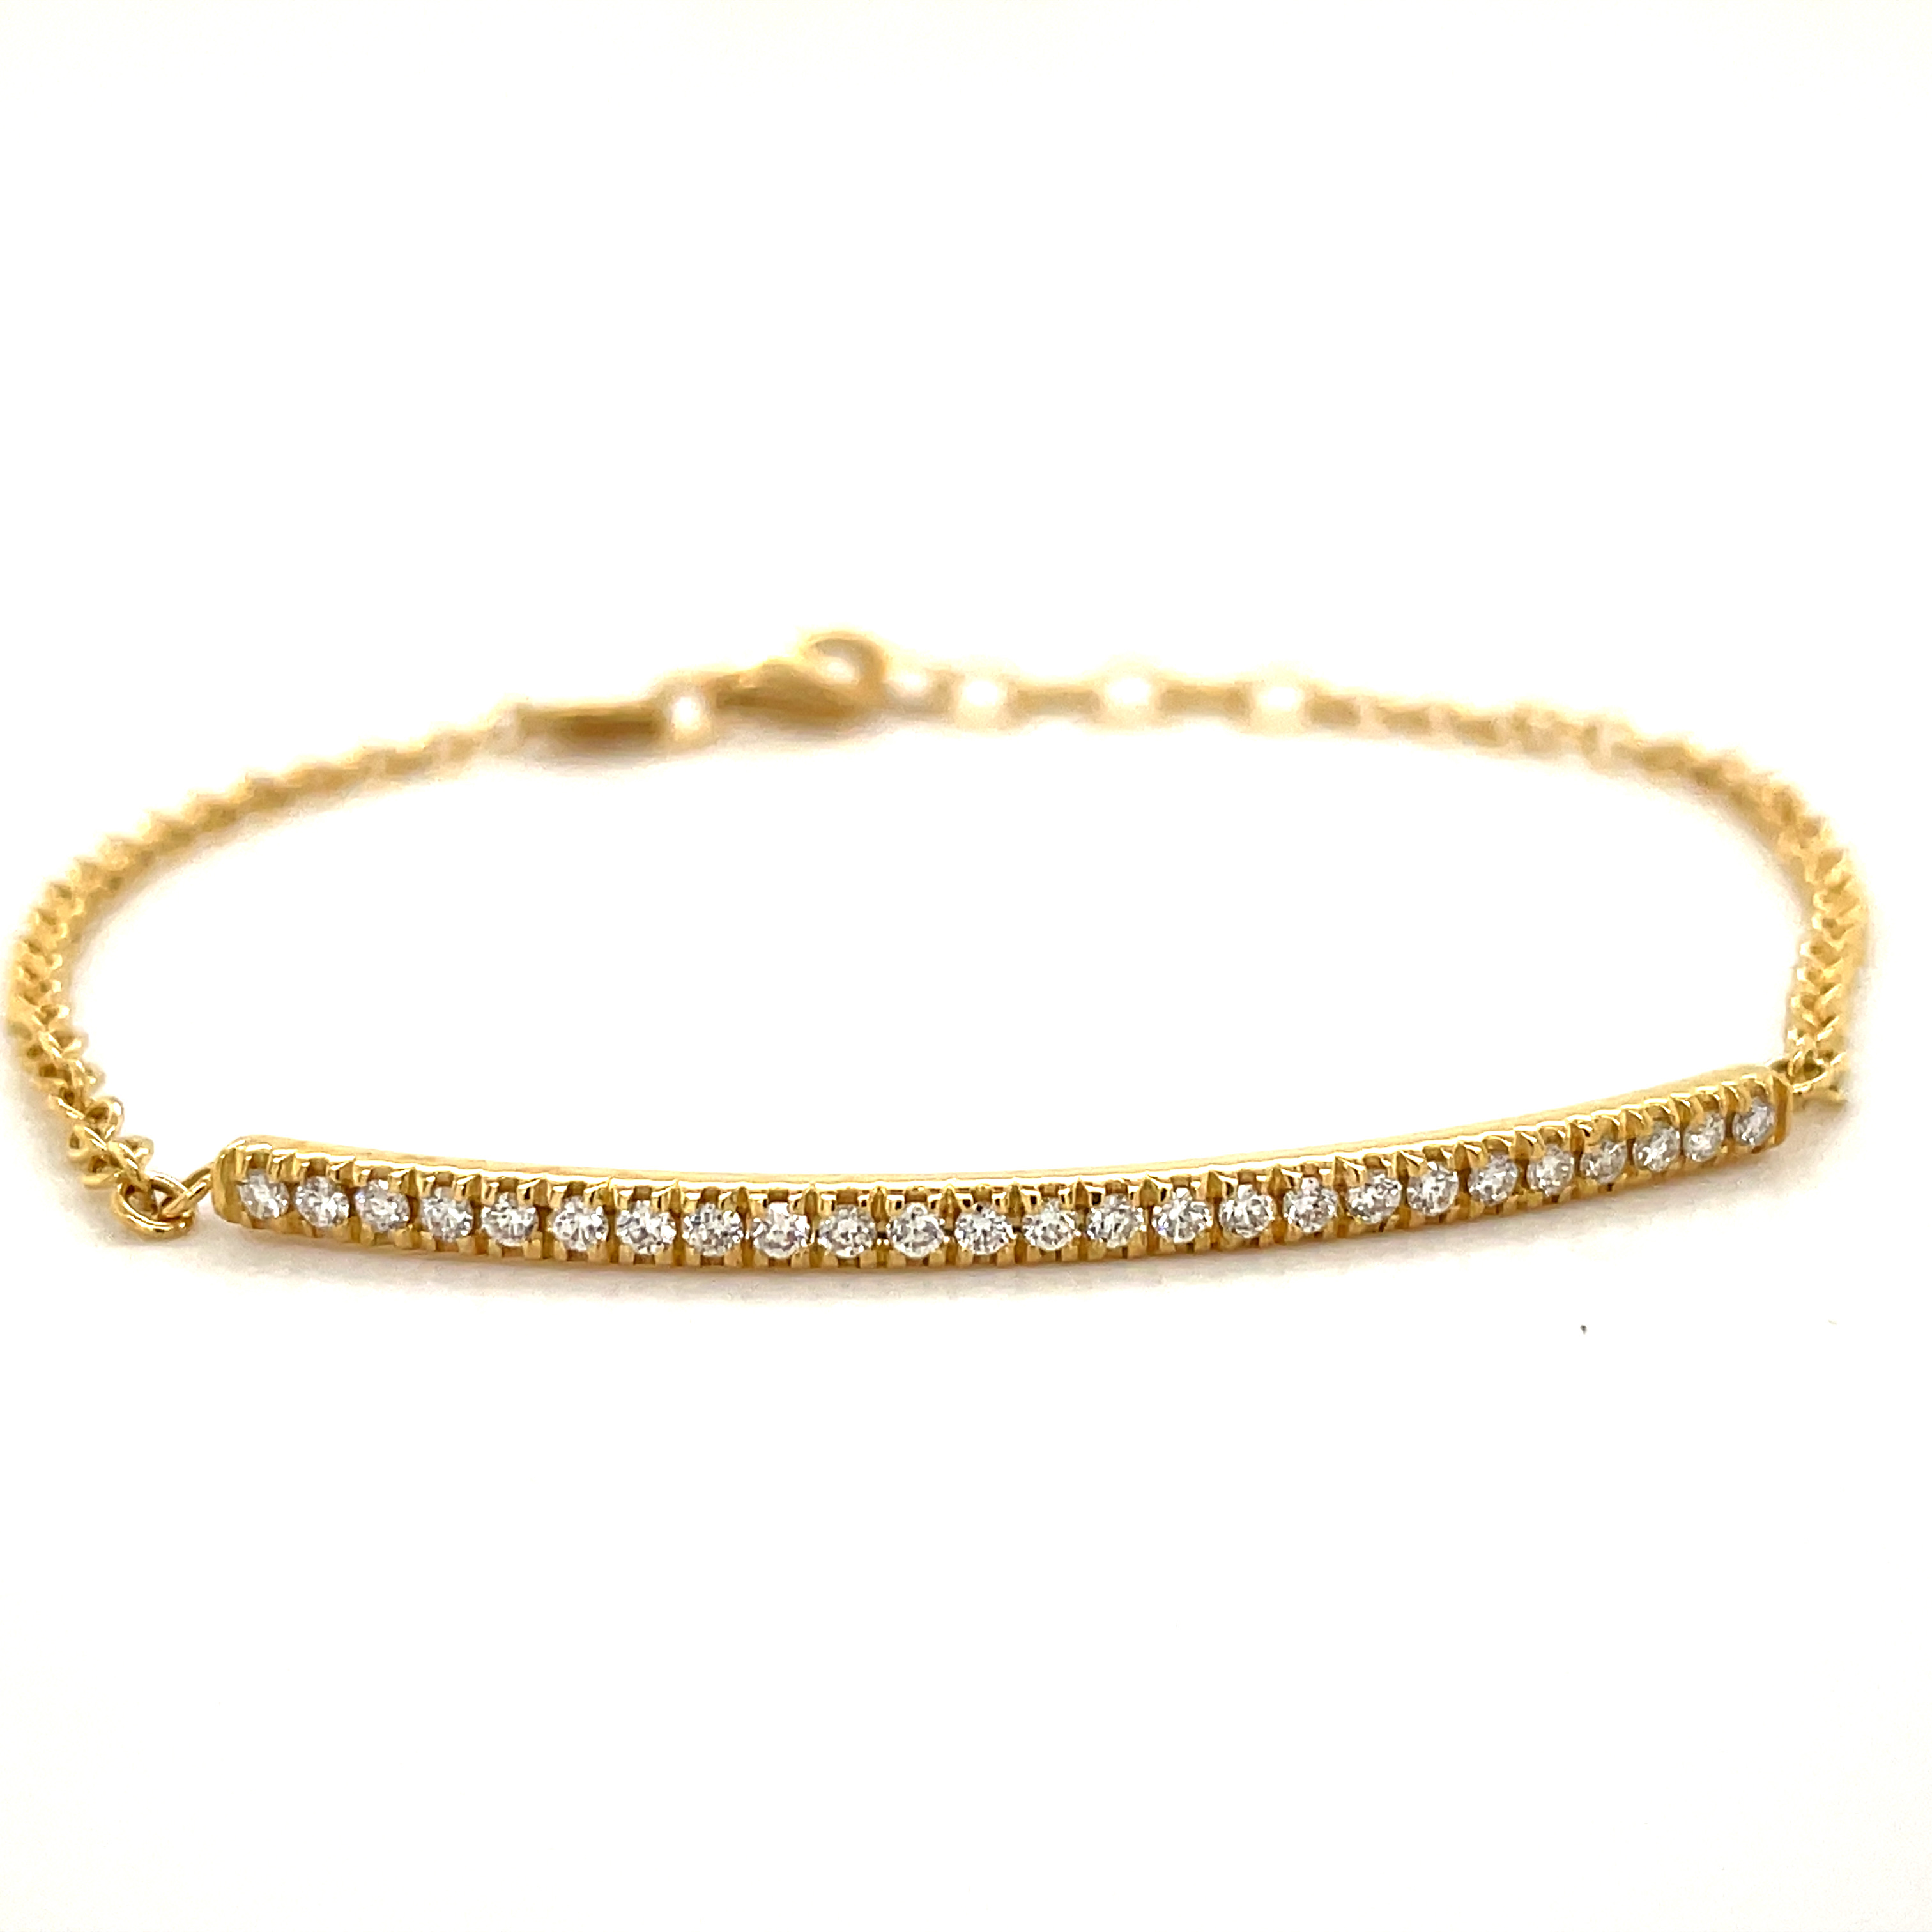 Italian made  Everyday bracelet that are easy to stack.  Set in 18k yellow gold mounting.  7" long with sizing loops  Round diamonds 0.78 cts   F/G color